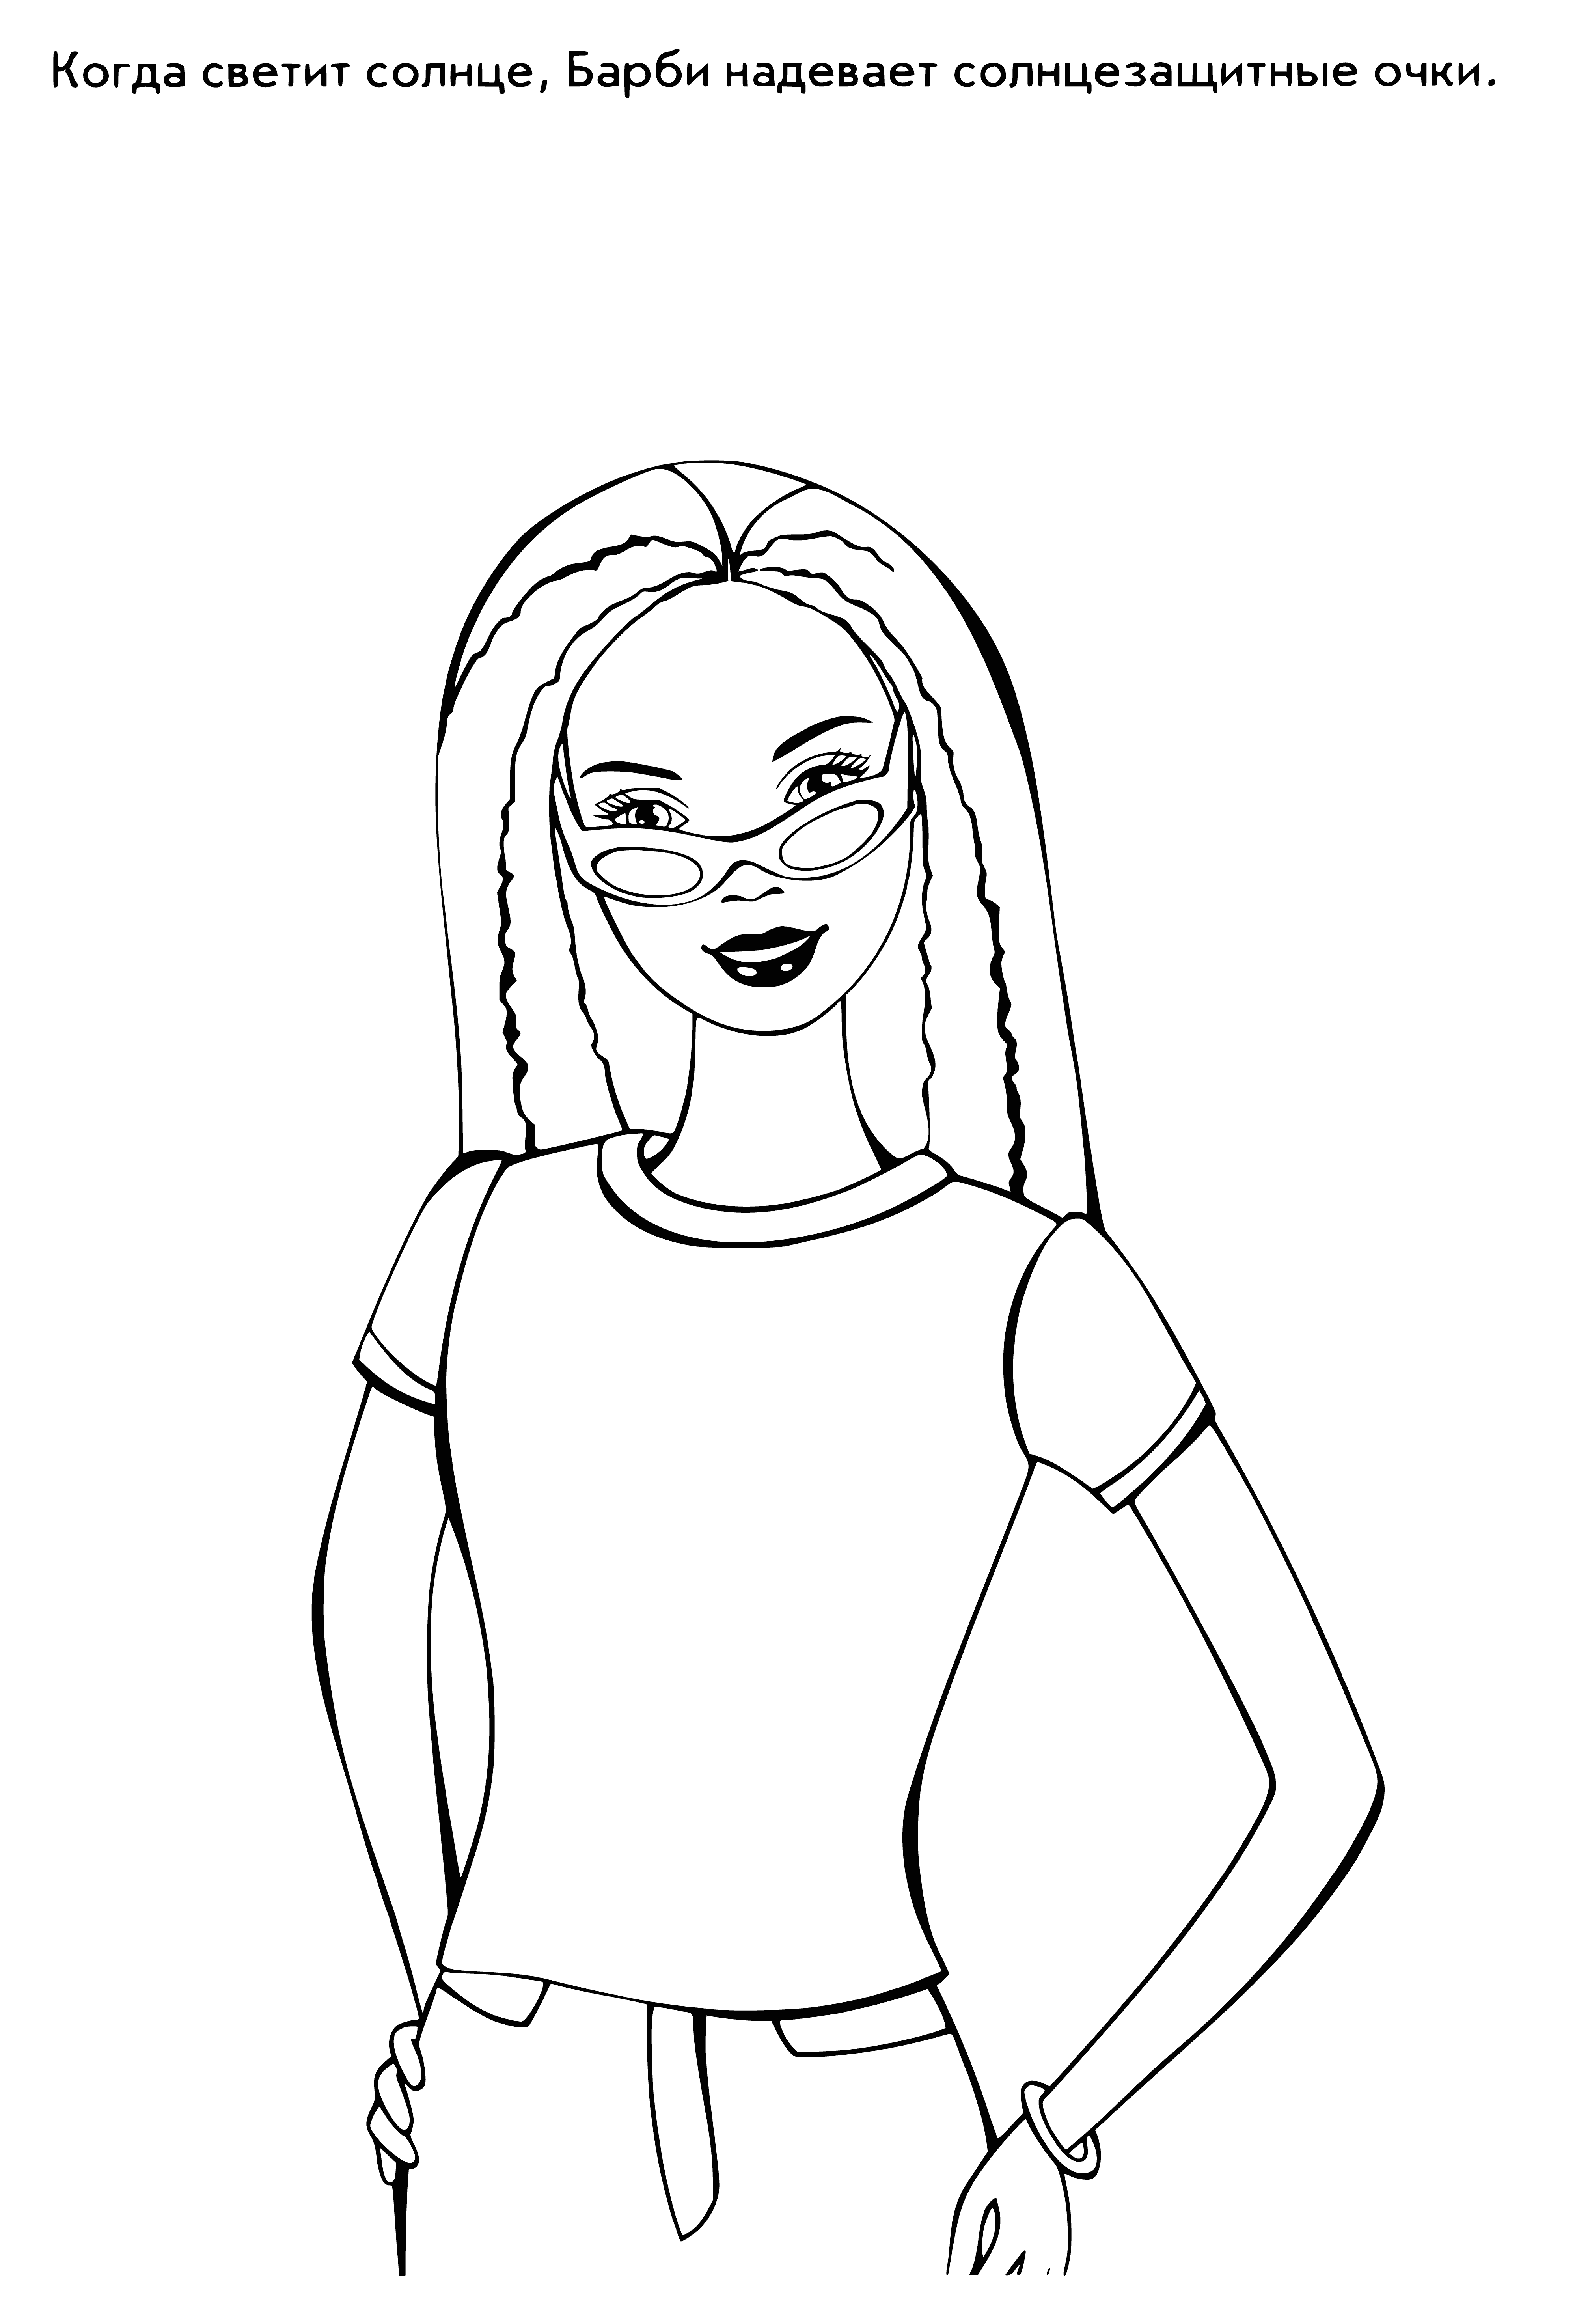 coloring page: Barbie in pink dress stands with hands behind back on white background in coloring page.